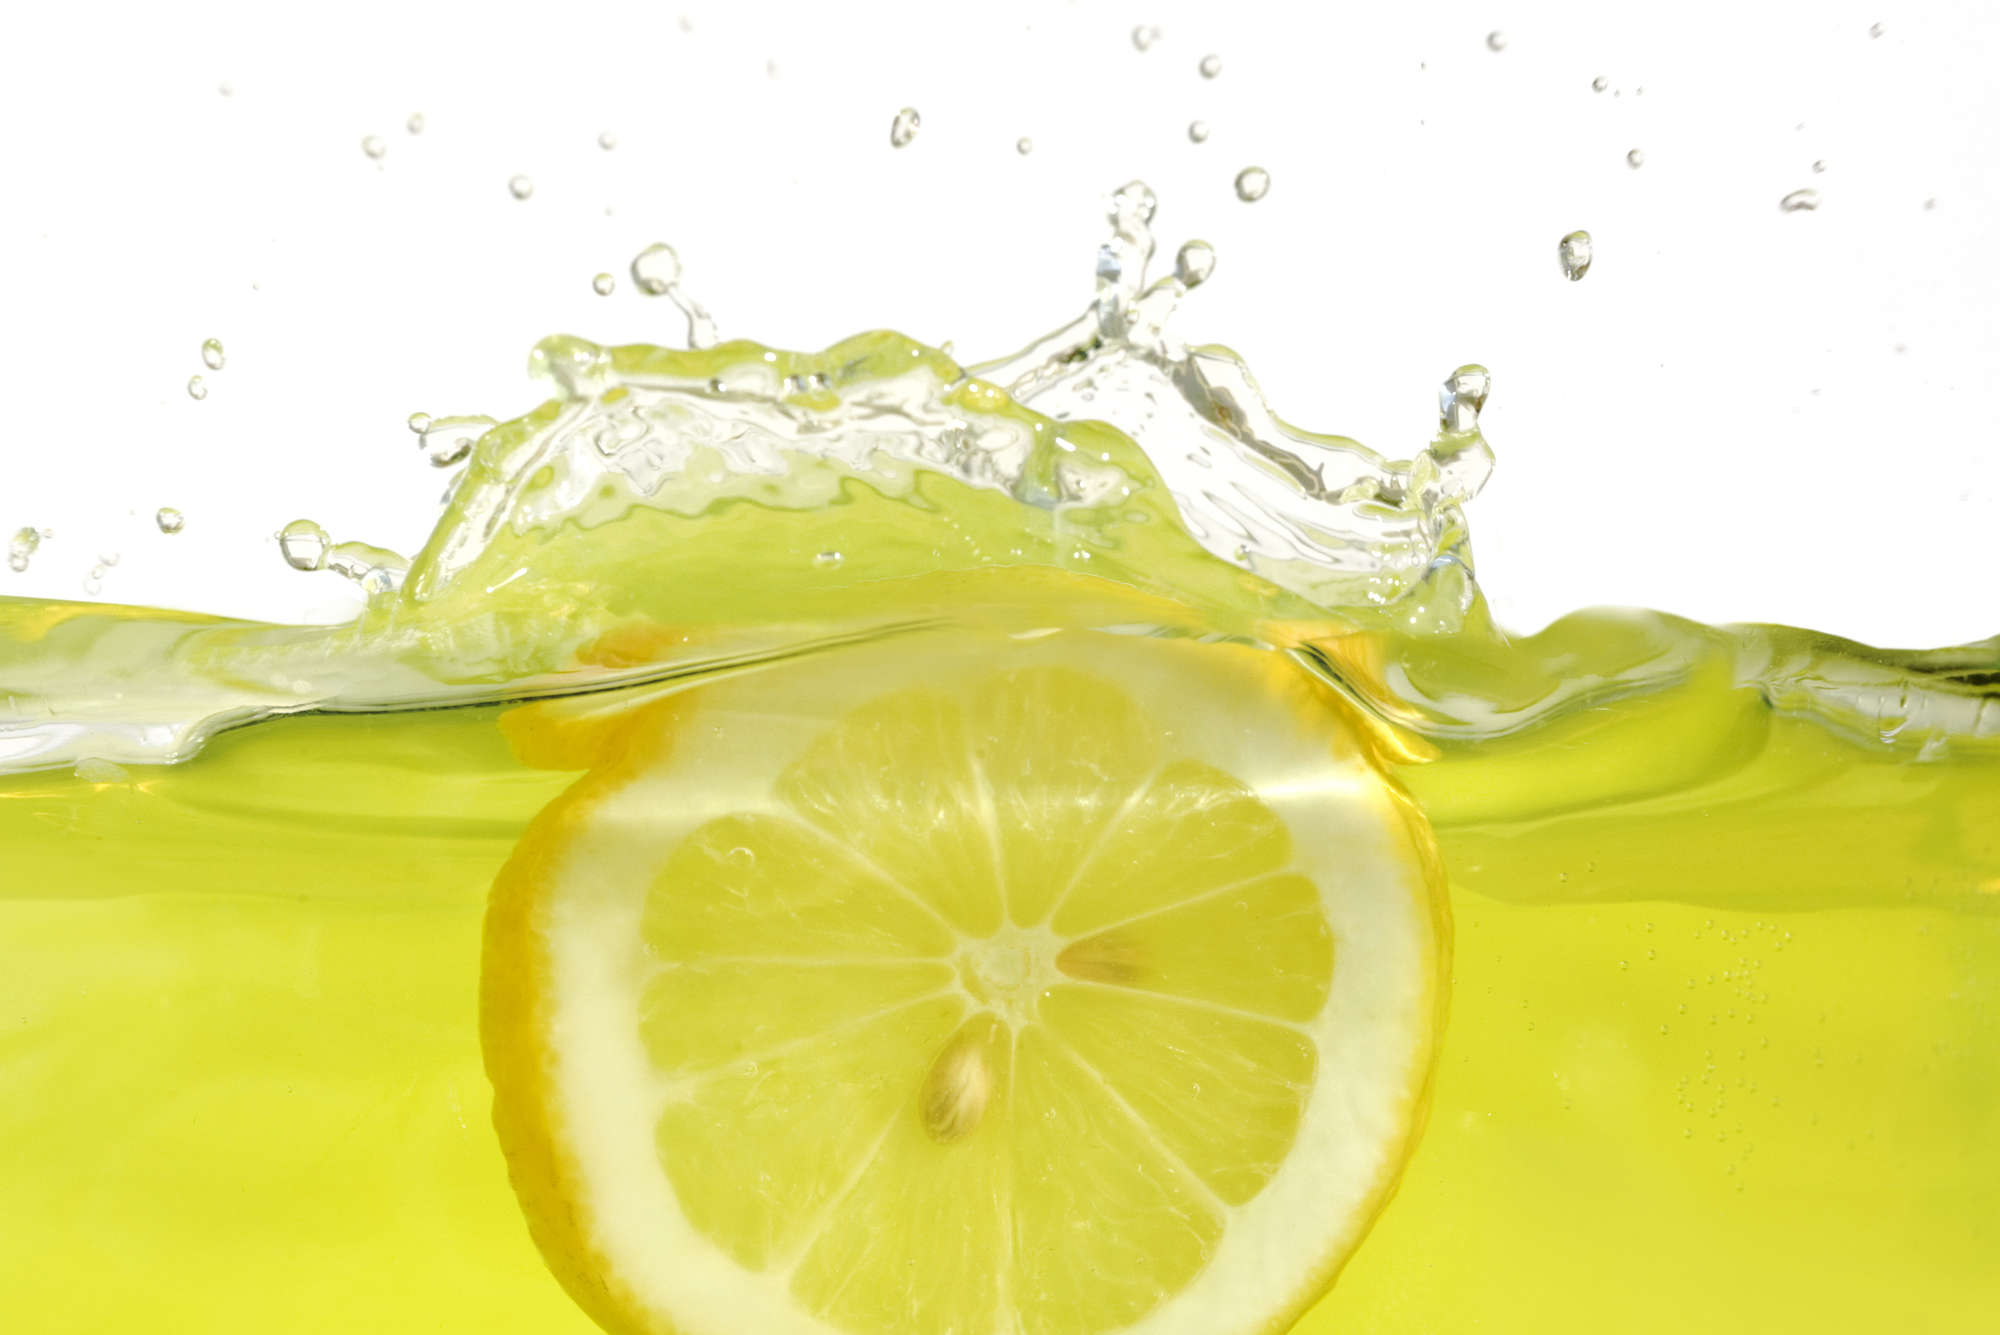             Lemon in the Water Wallpaper - Premium Smooth Non-woven
        